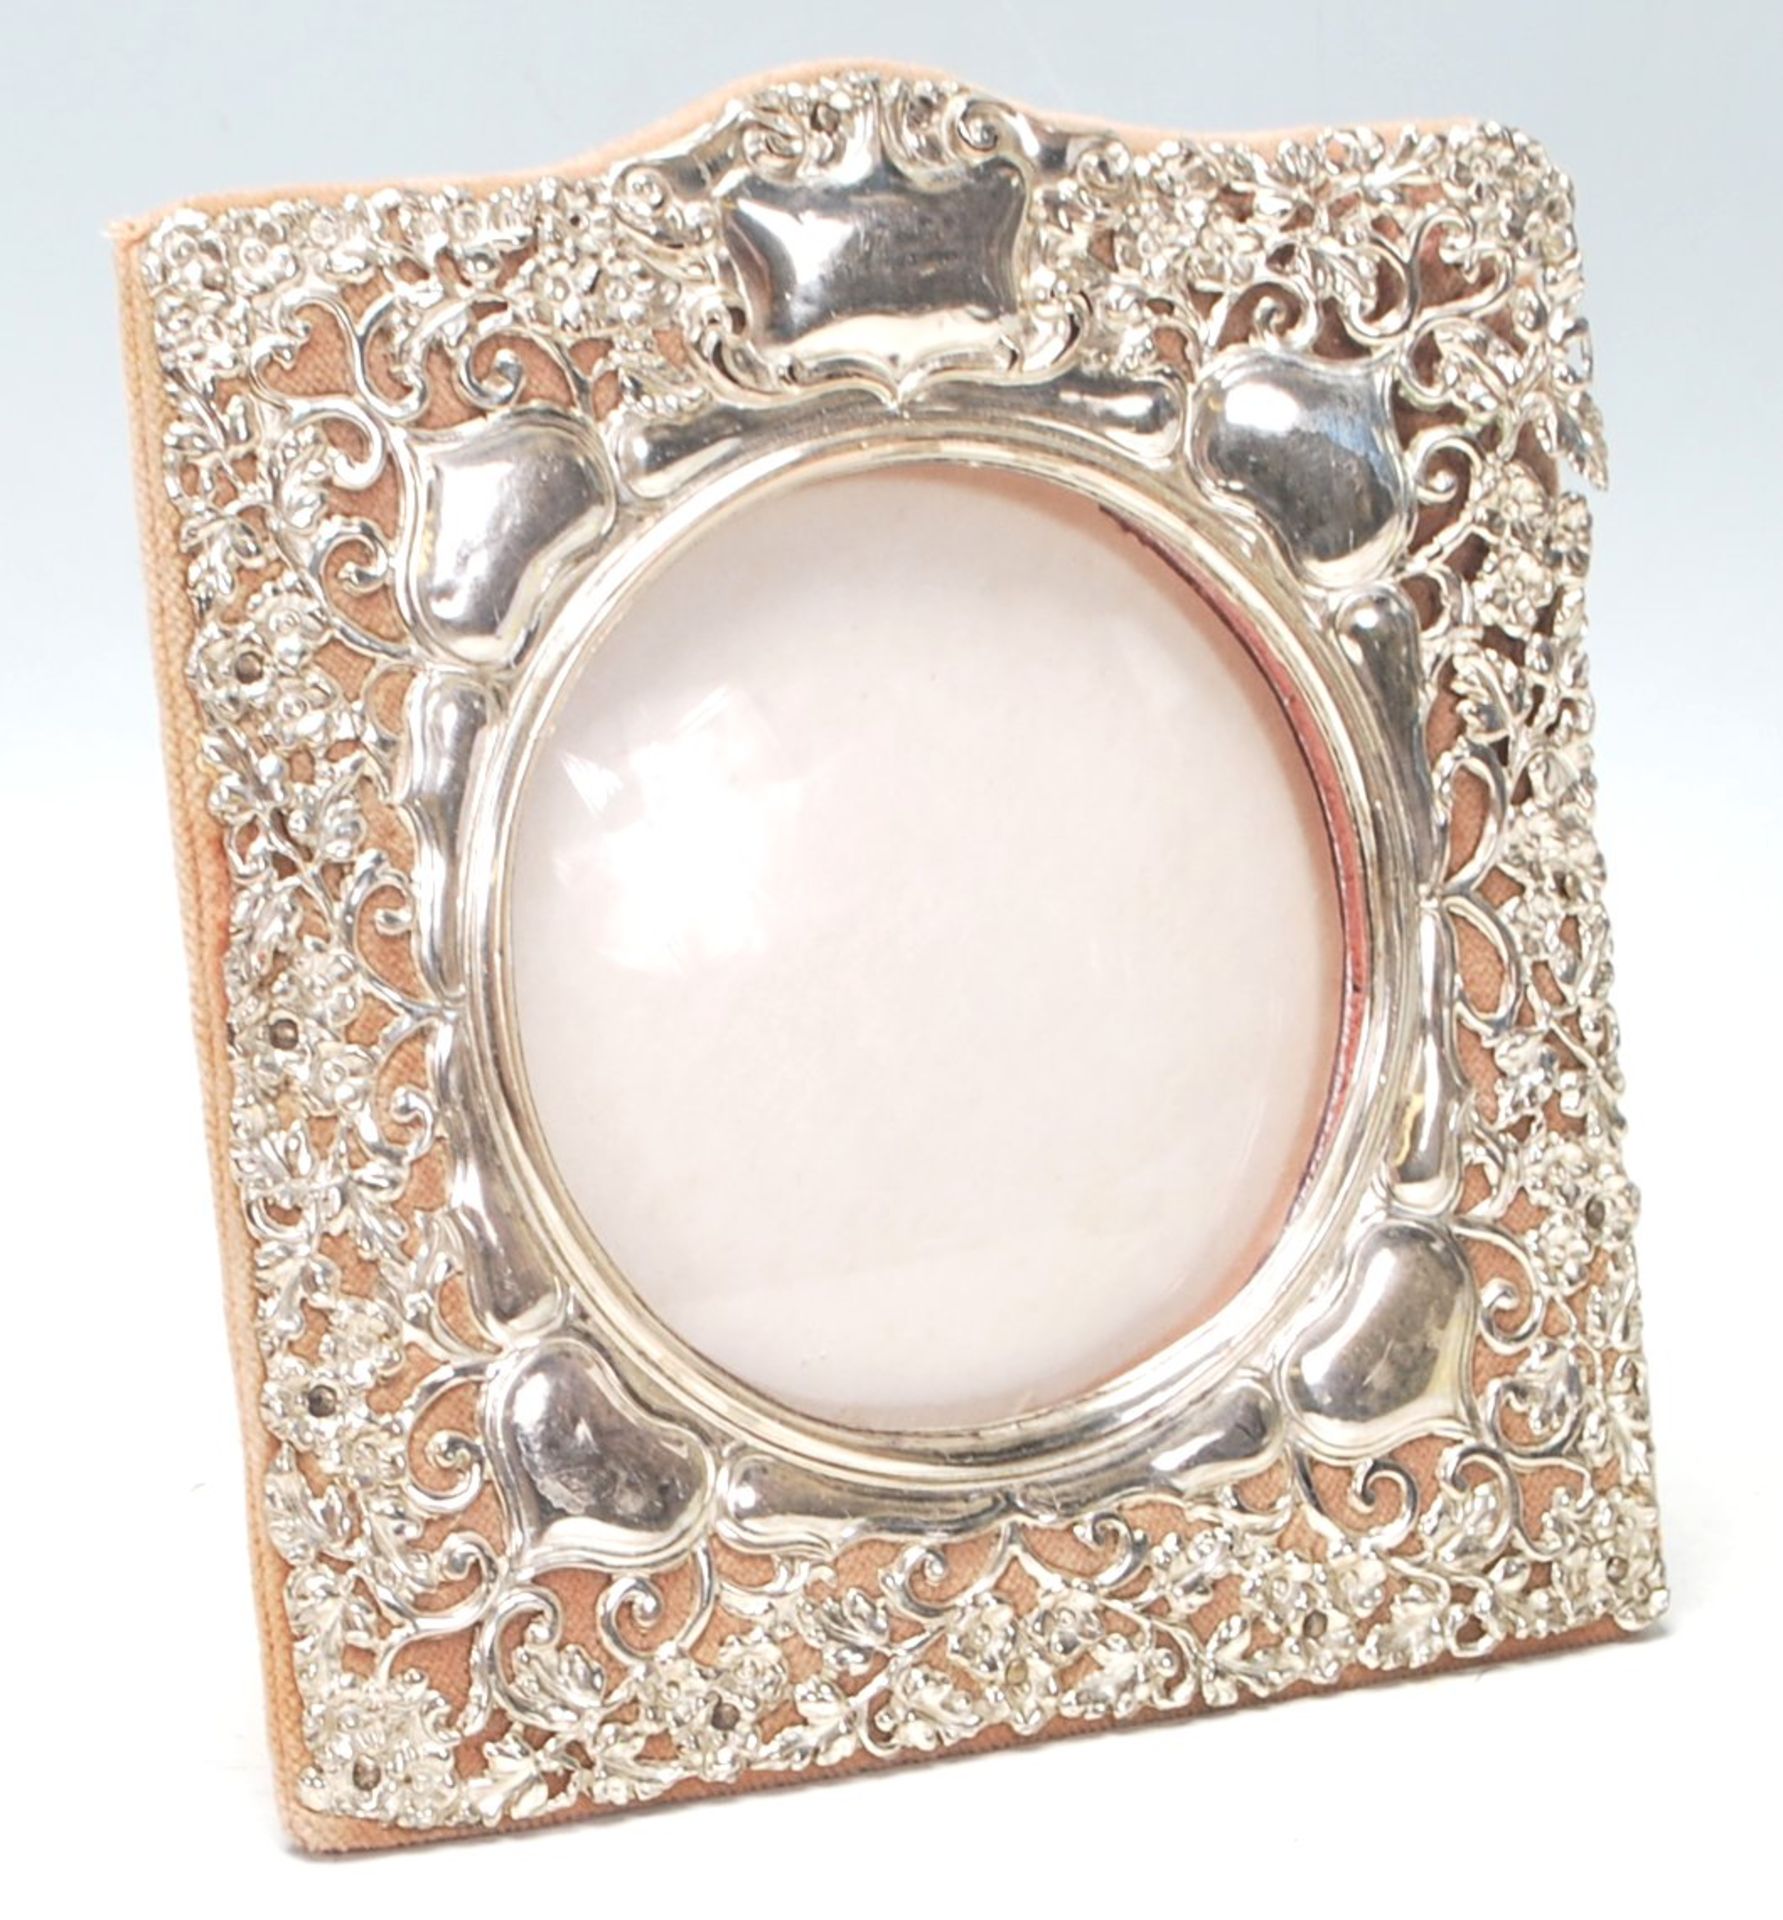 A silver 1901 Birmingham hallmarked photograph frame by Synyer and Beddoes (Harry Synyer & Charles